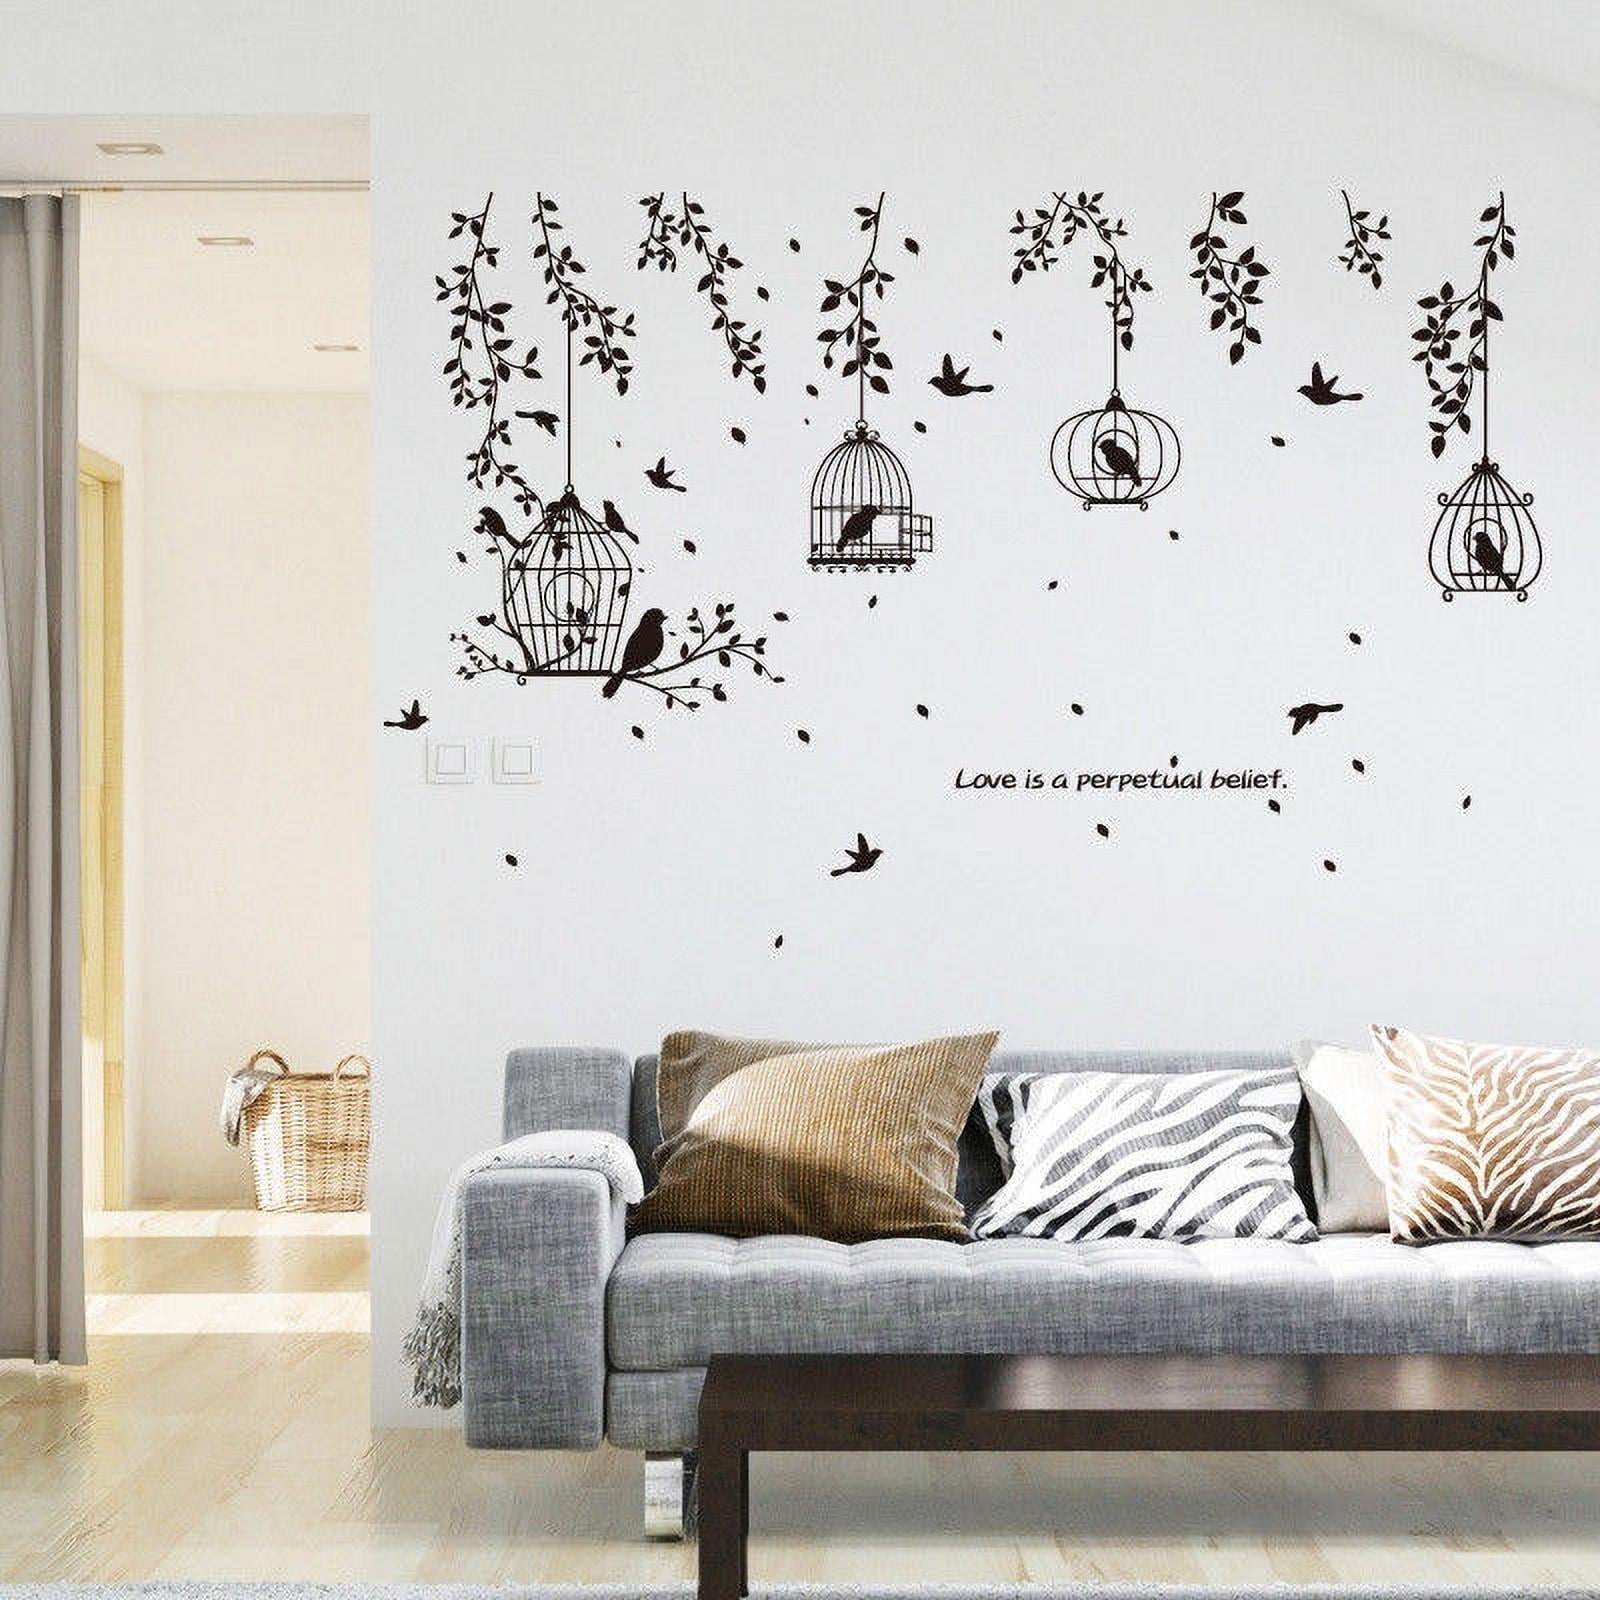 66 Styles Vinyl Home Room Decor Art Wall Decal Sticker Bedroom Removable Mural 